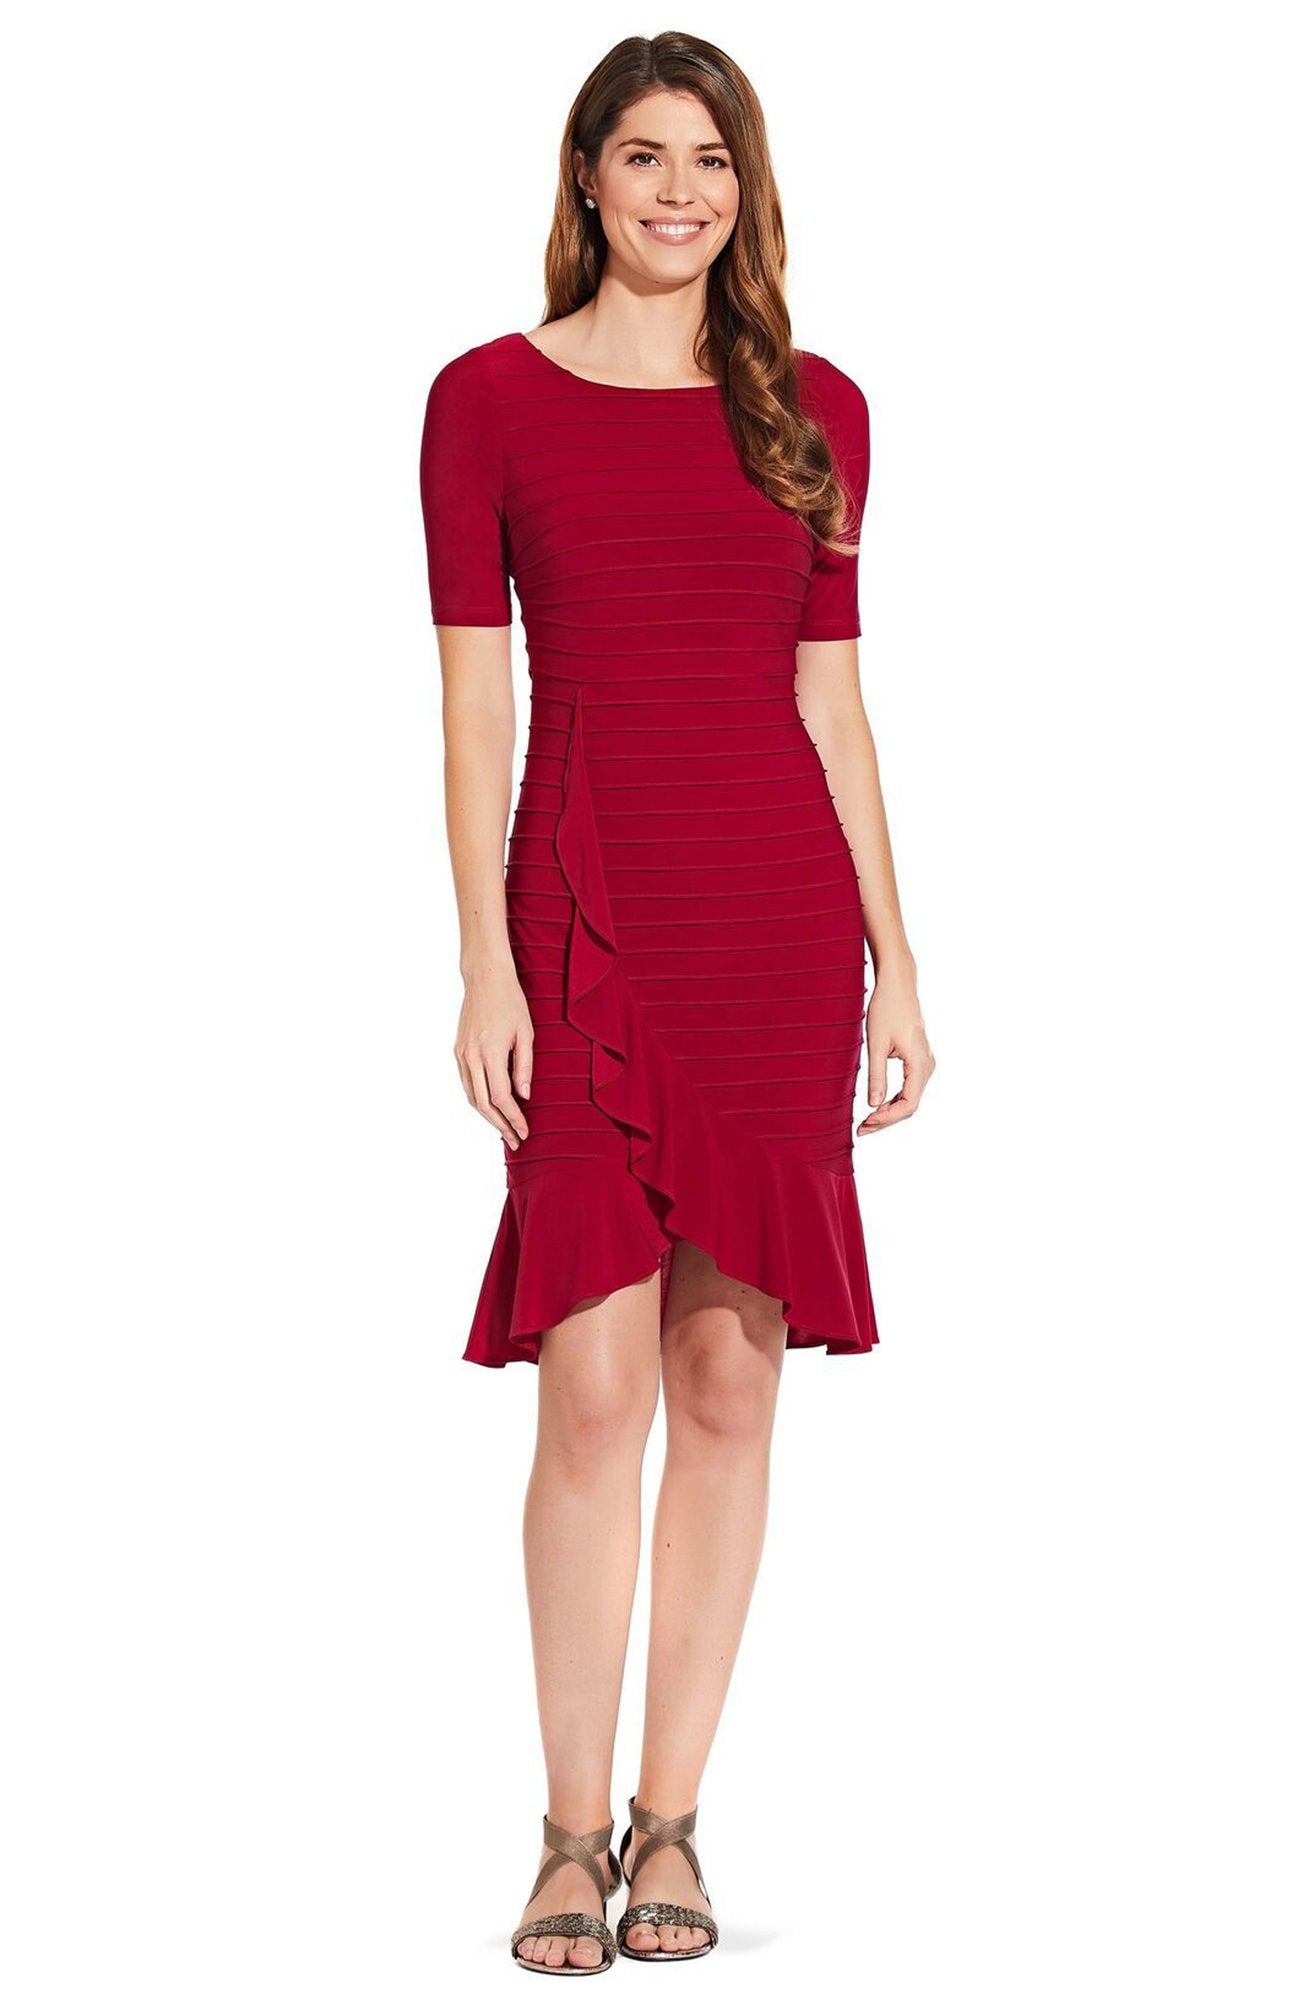 Adrianna Papell - AP1D103506 Bateau Ribbed Jersey Sheath Dress In Red